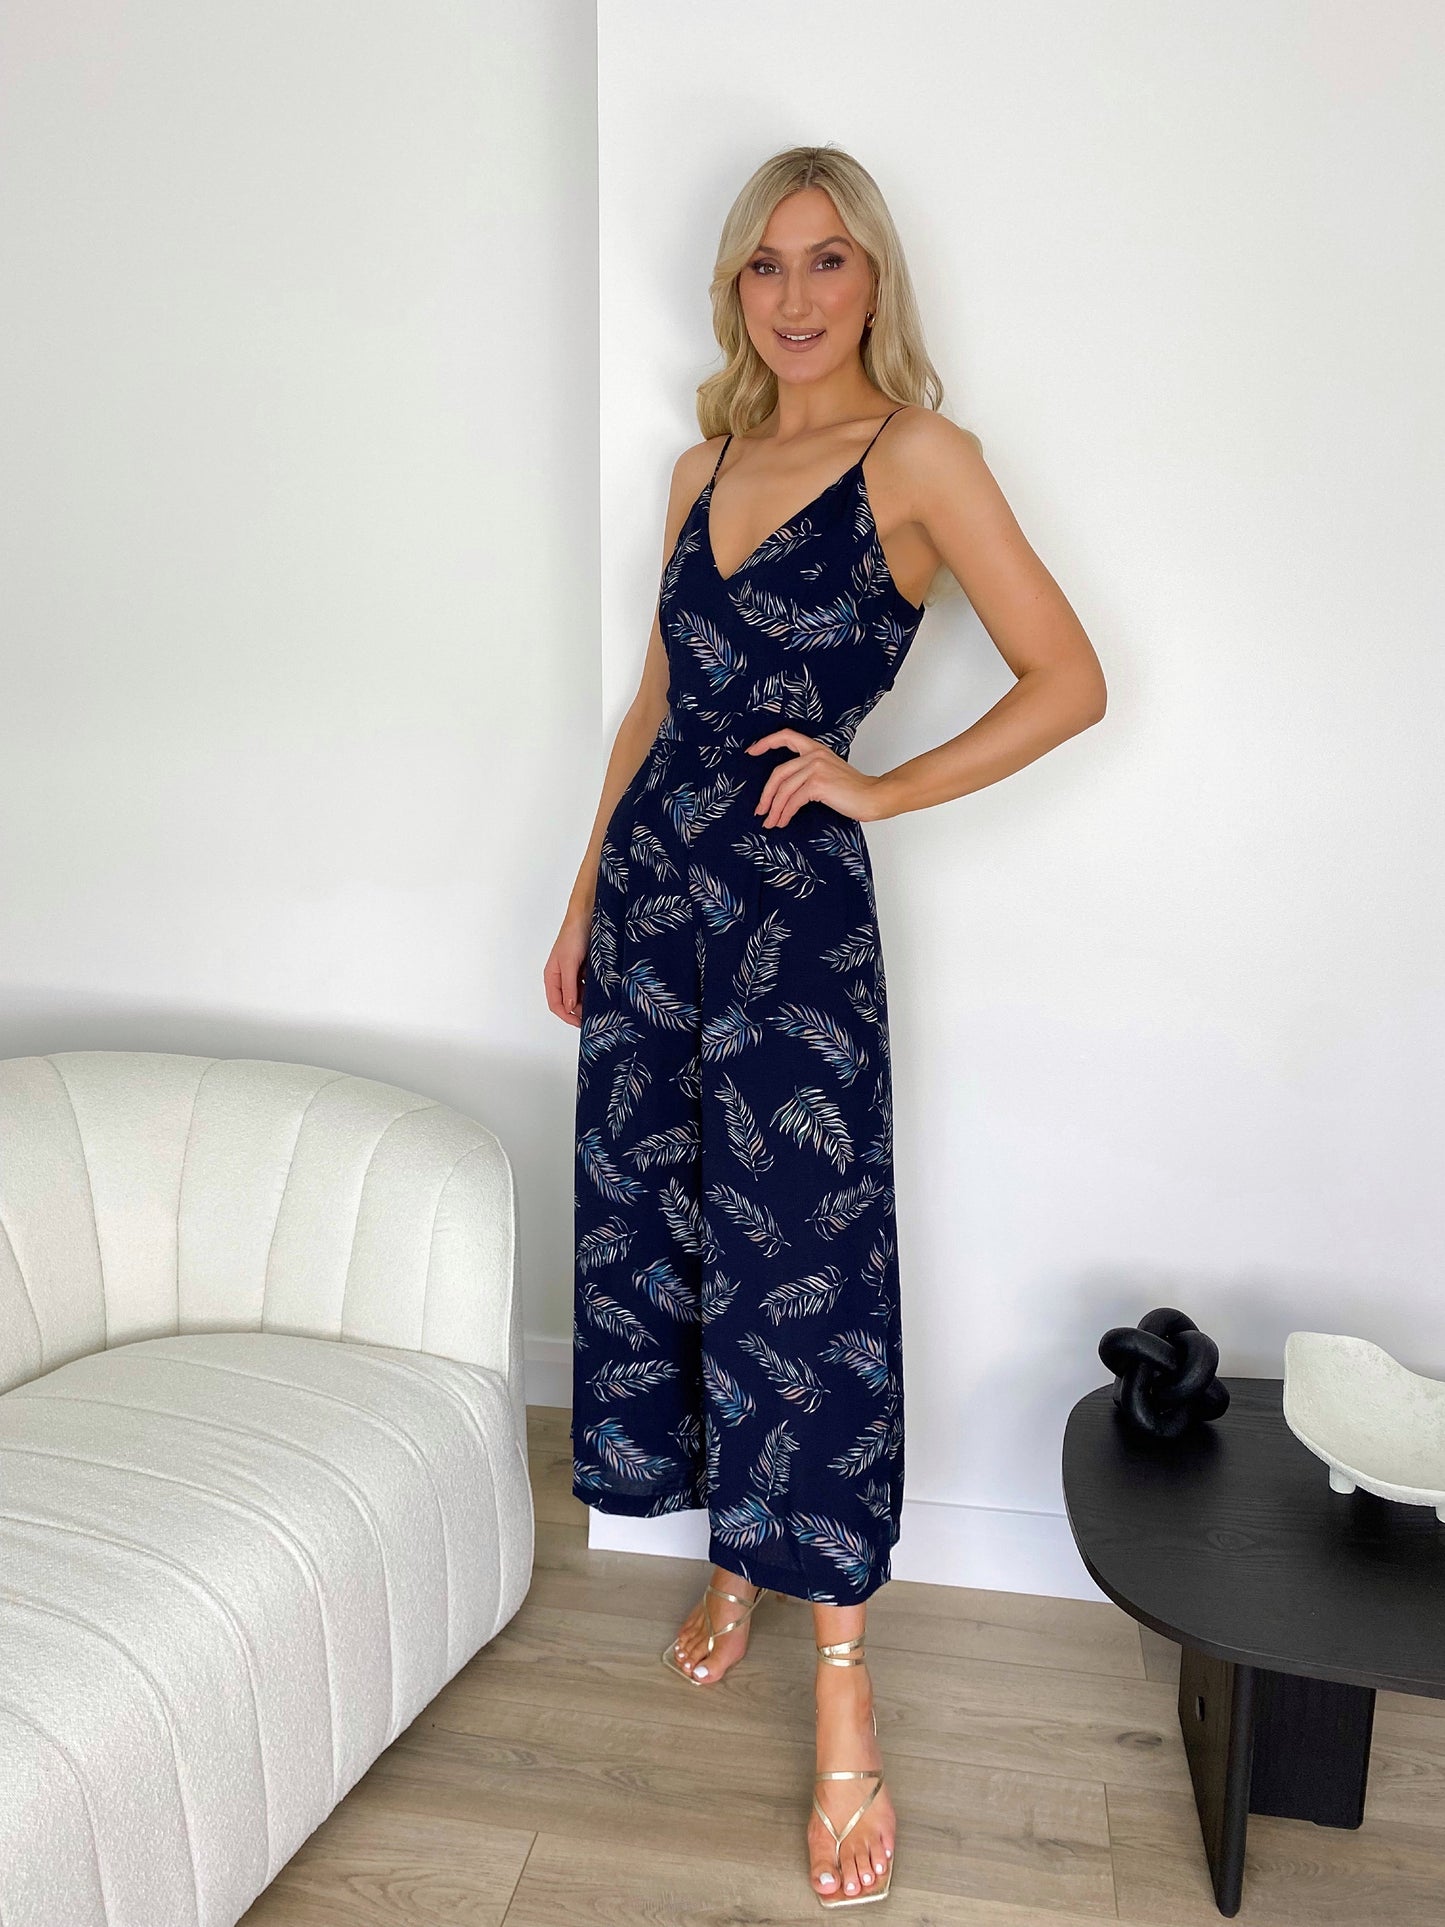 Zaneta Summer Navy Print with Shoestring Strap Jumpsuit